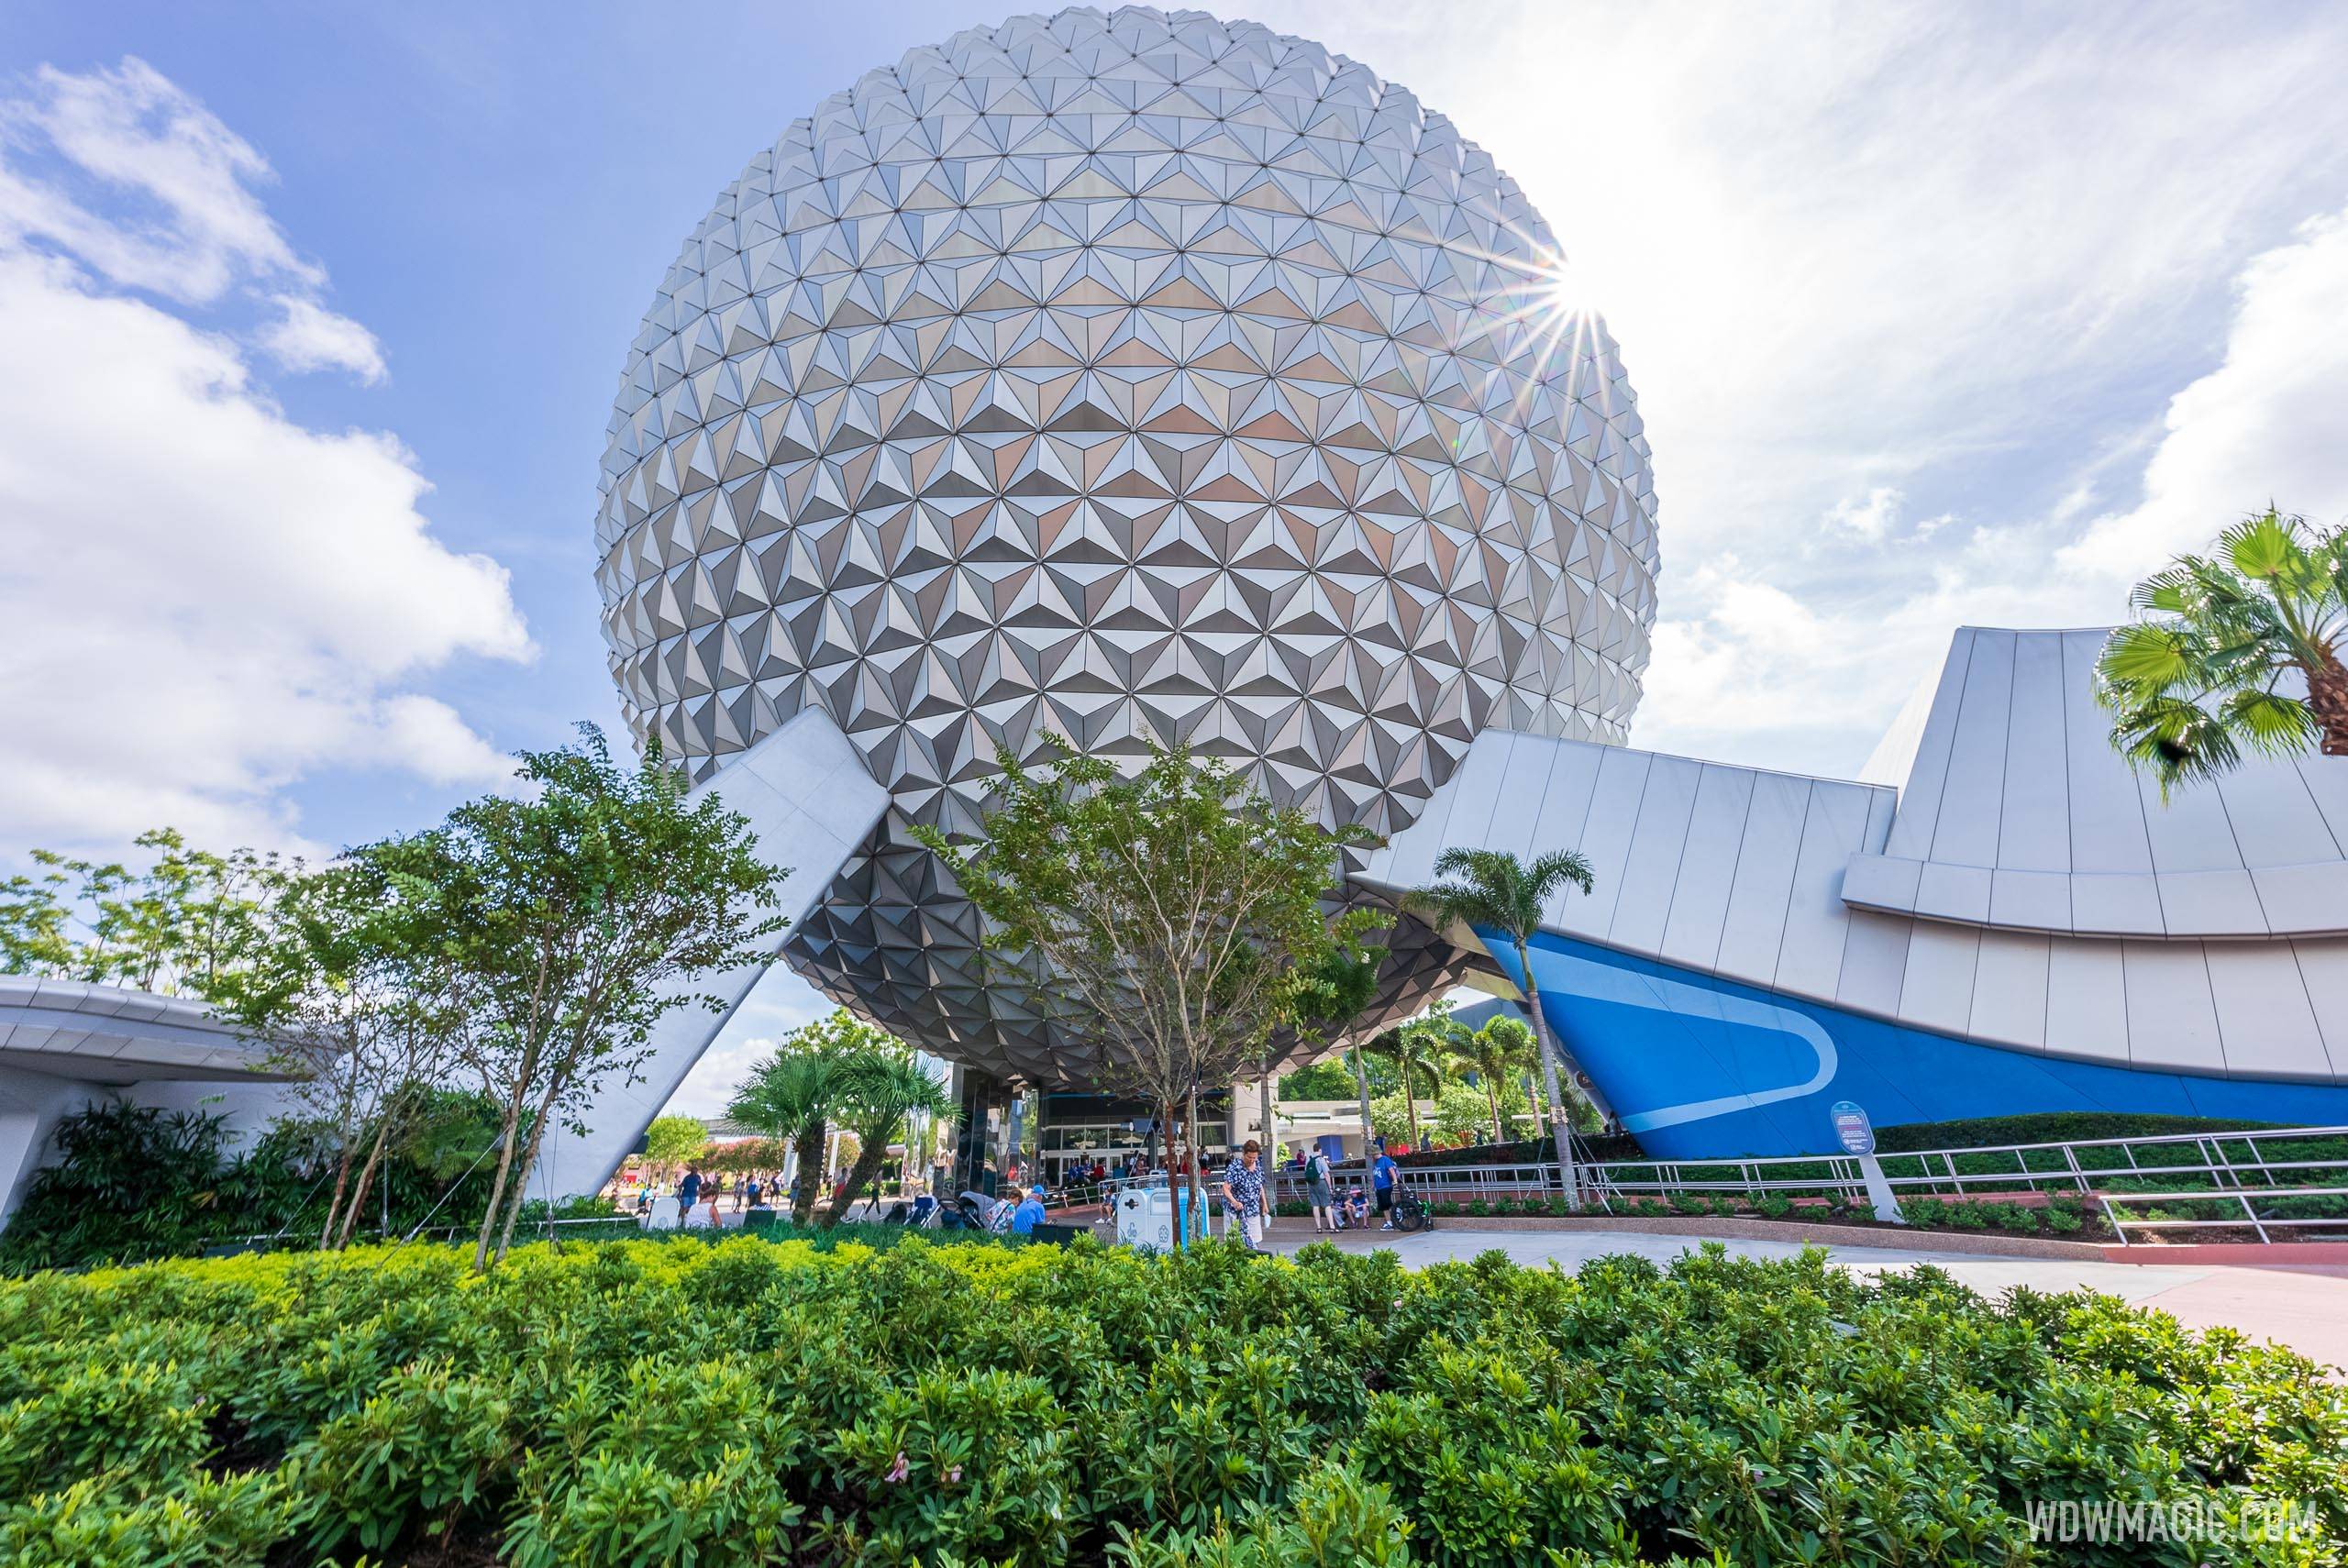 New landscaping around Spaceship Earth - August 2021